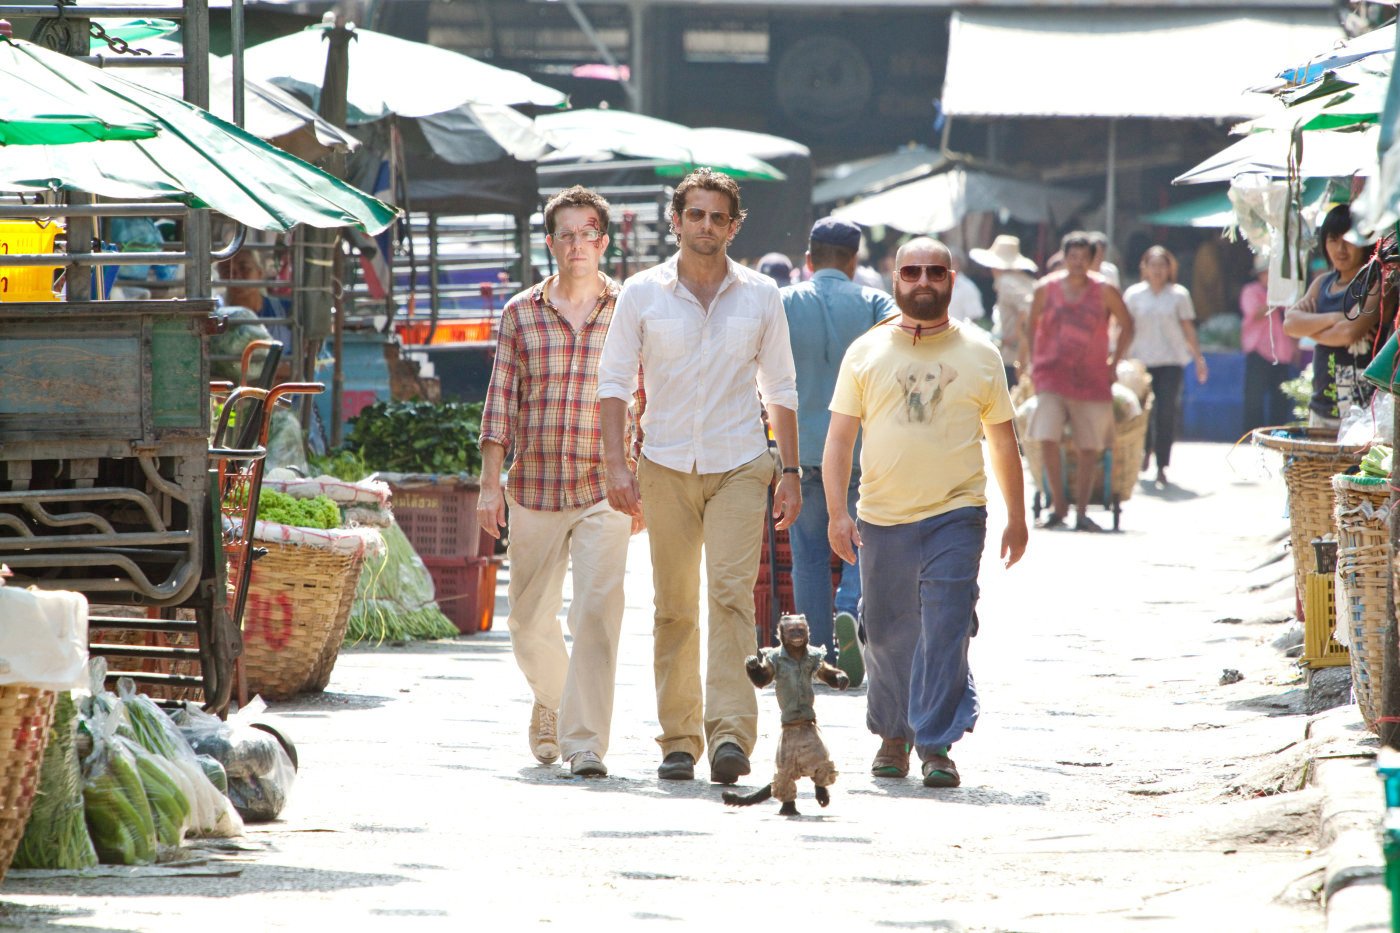 Ed Helms, Bradley Cooper and Zach Galifianakis in Warner Bros. Pictures' The Hangover Part II (2011)